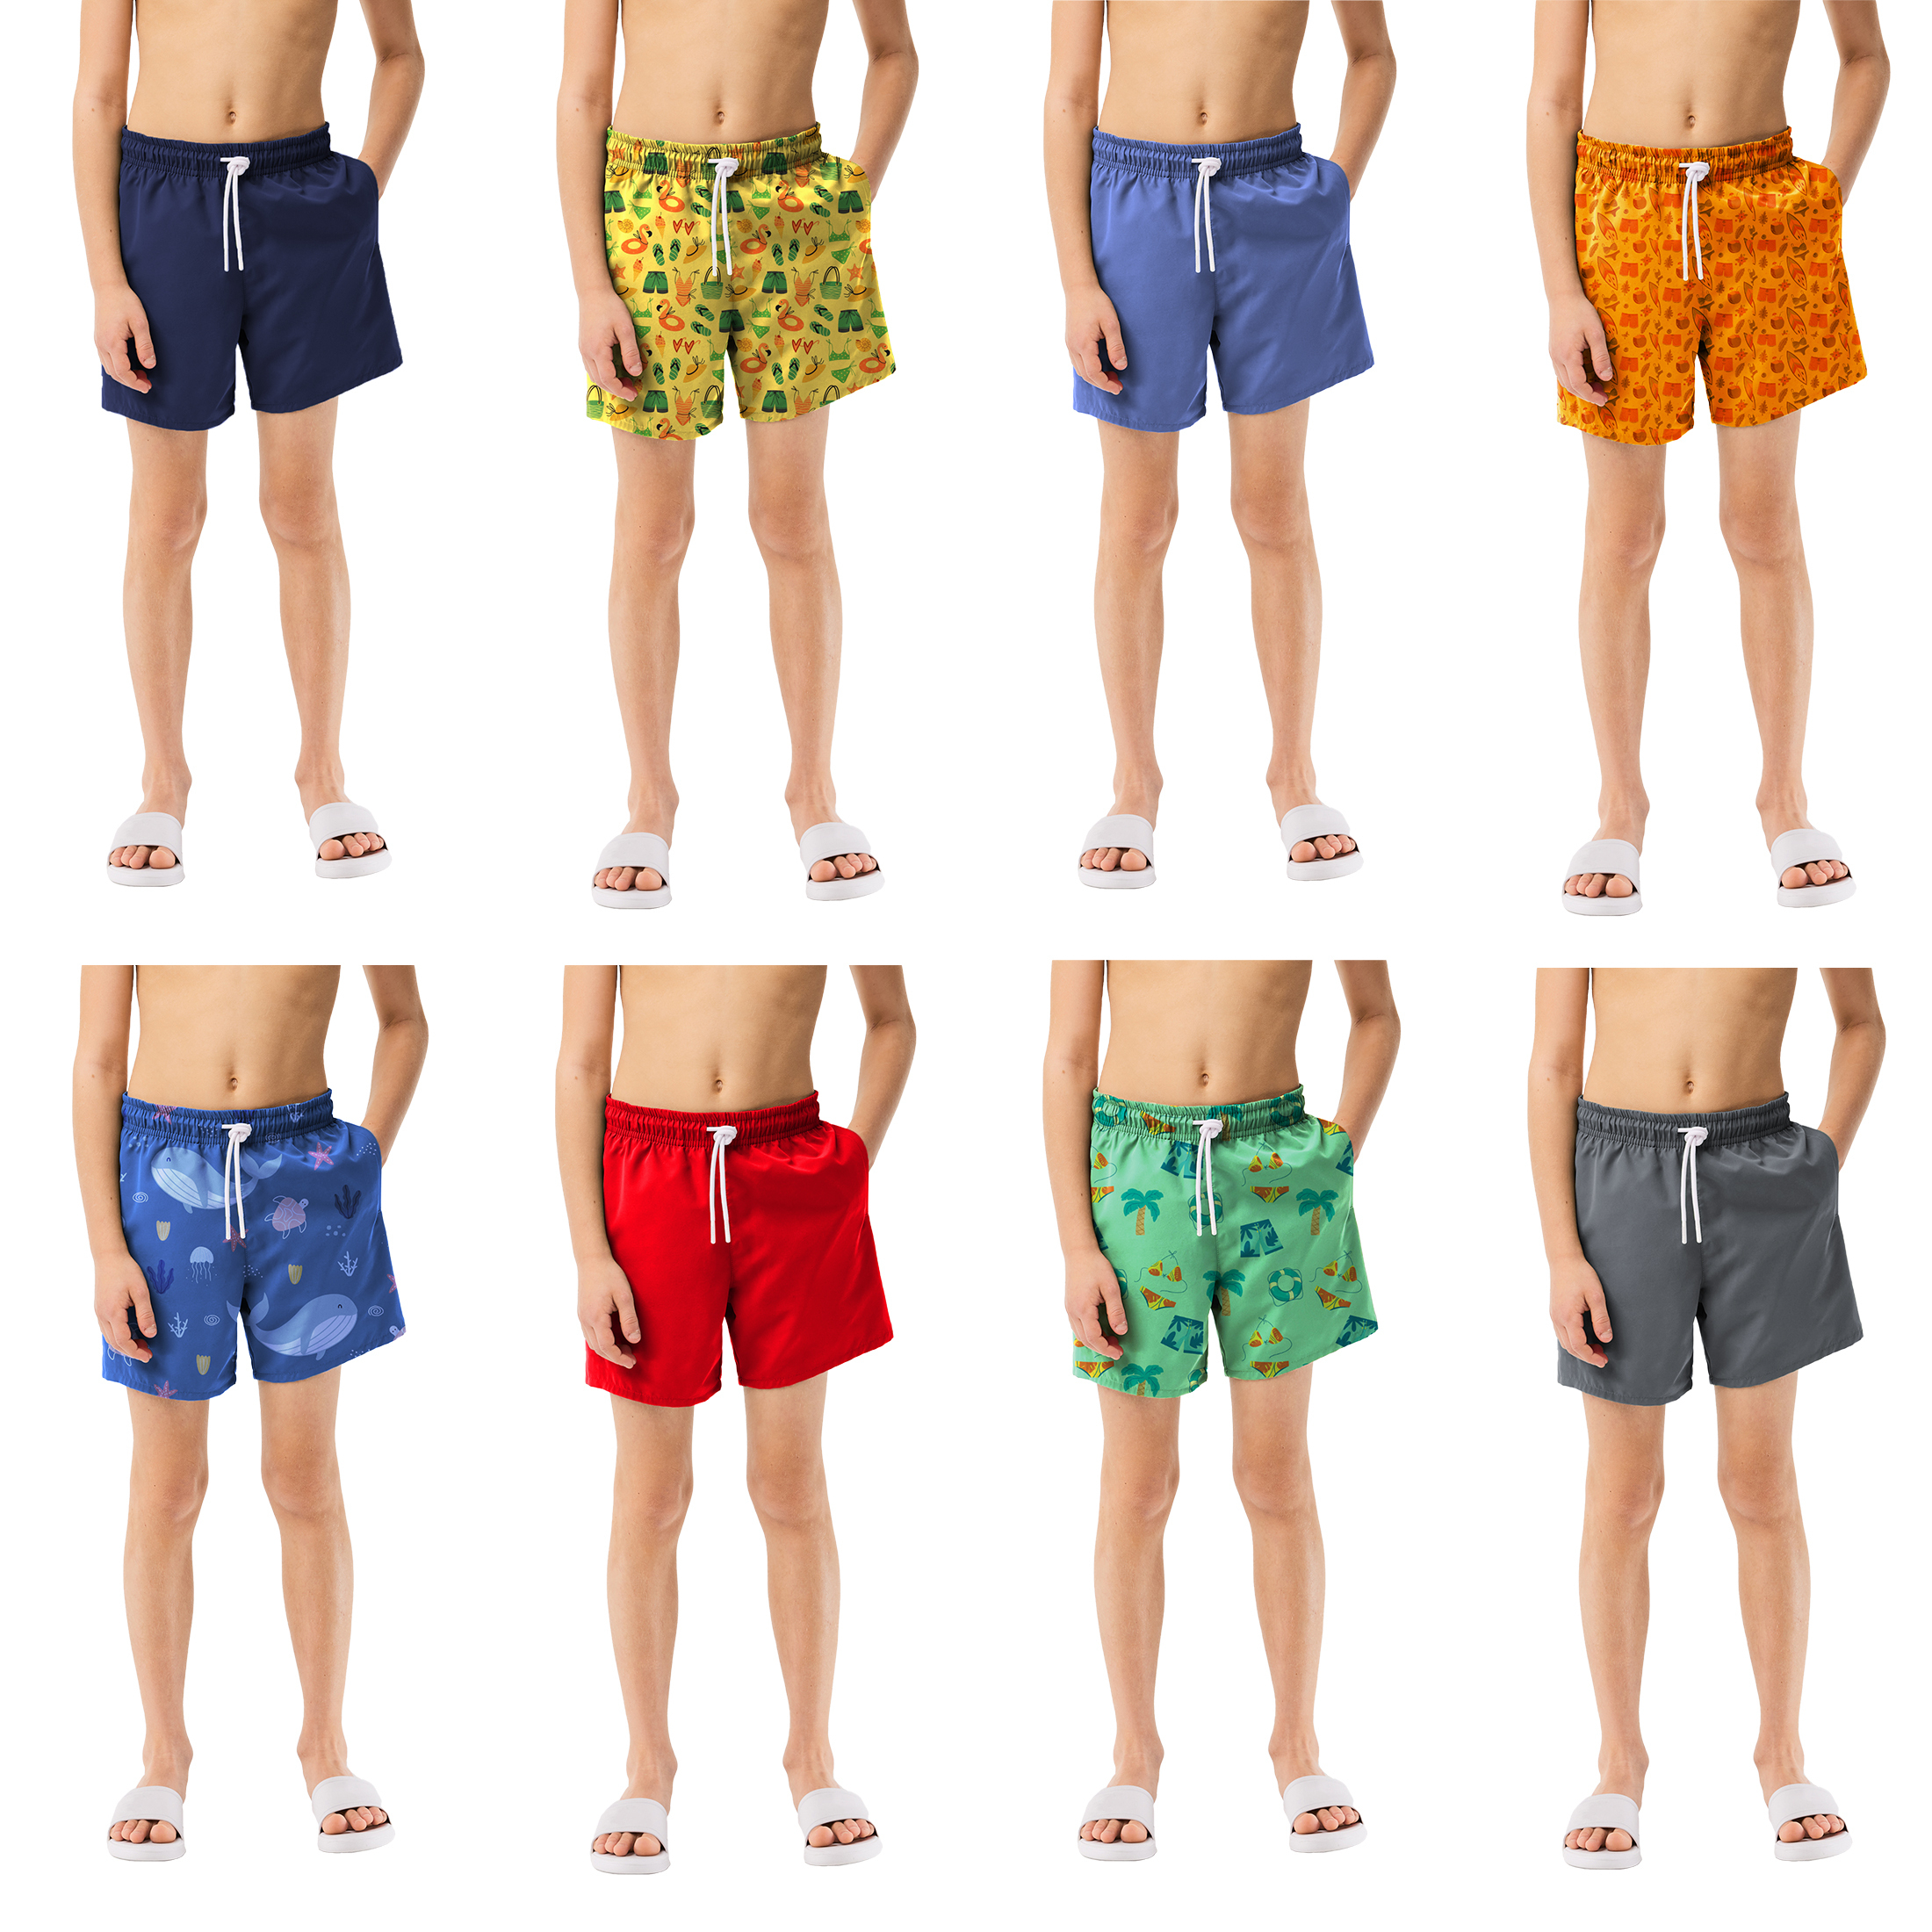 3-Pack: Boy's Quick-Dry Solid & Print Active Summer Beach Swimming Trunks Shorts - Print, Small